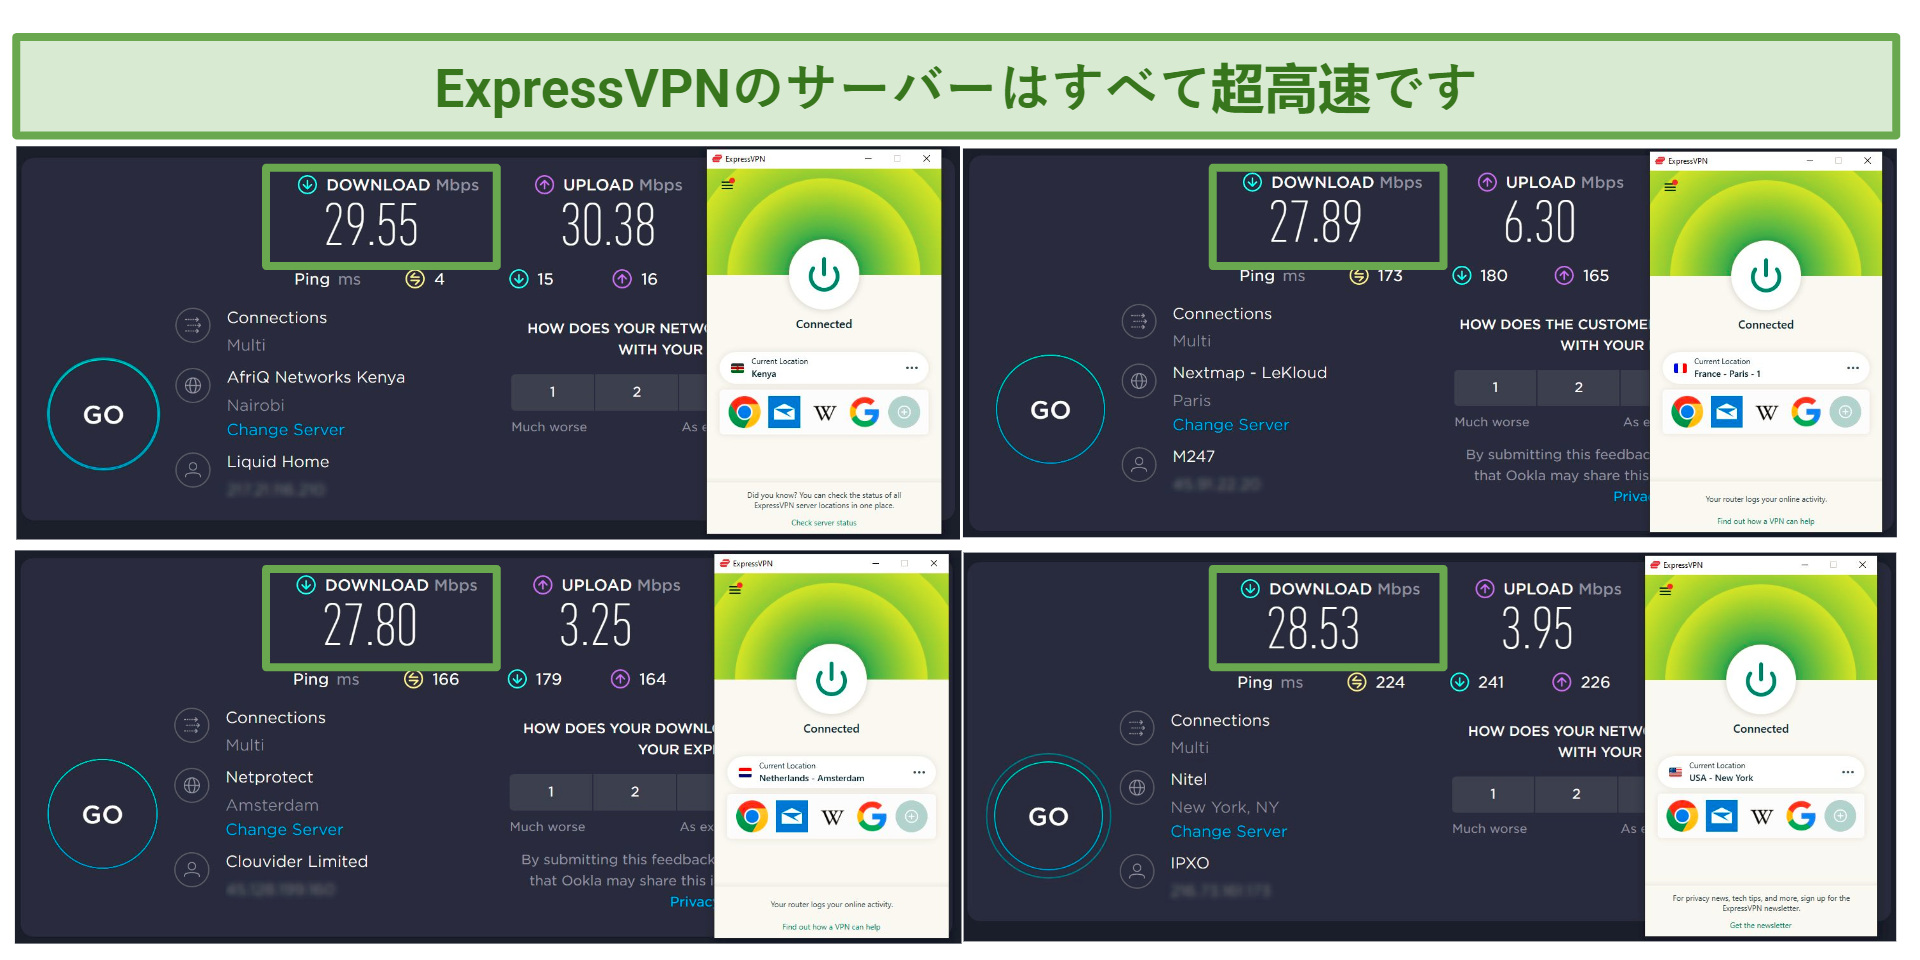 You won’t encounter any slowdowns while using ExpressVPN to surf the web